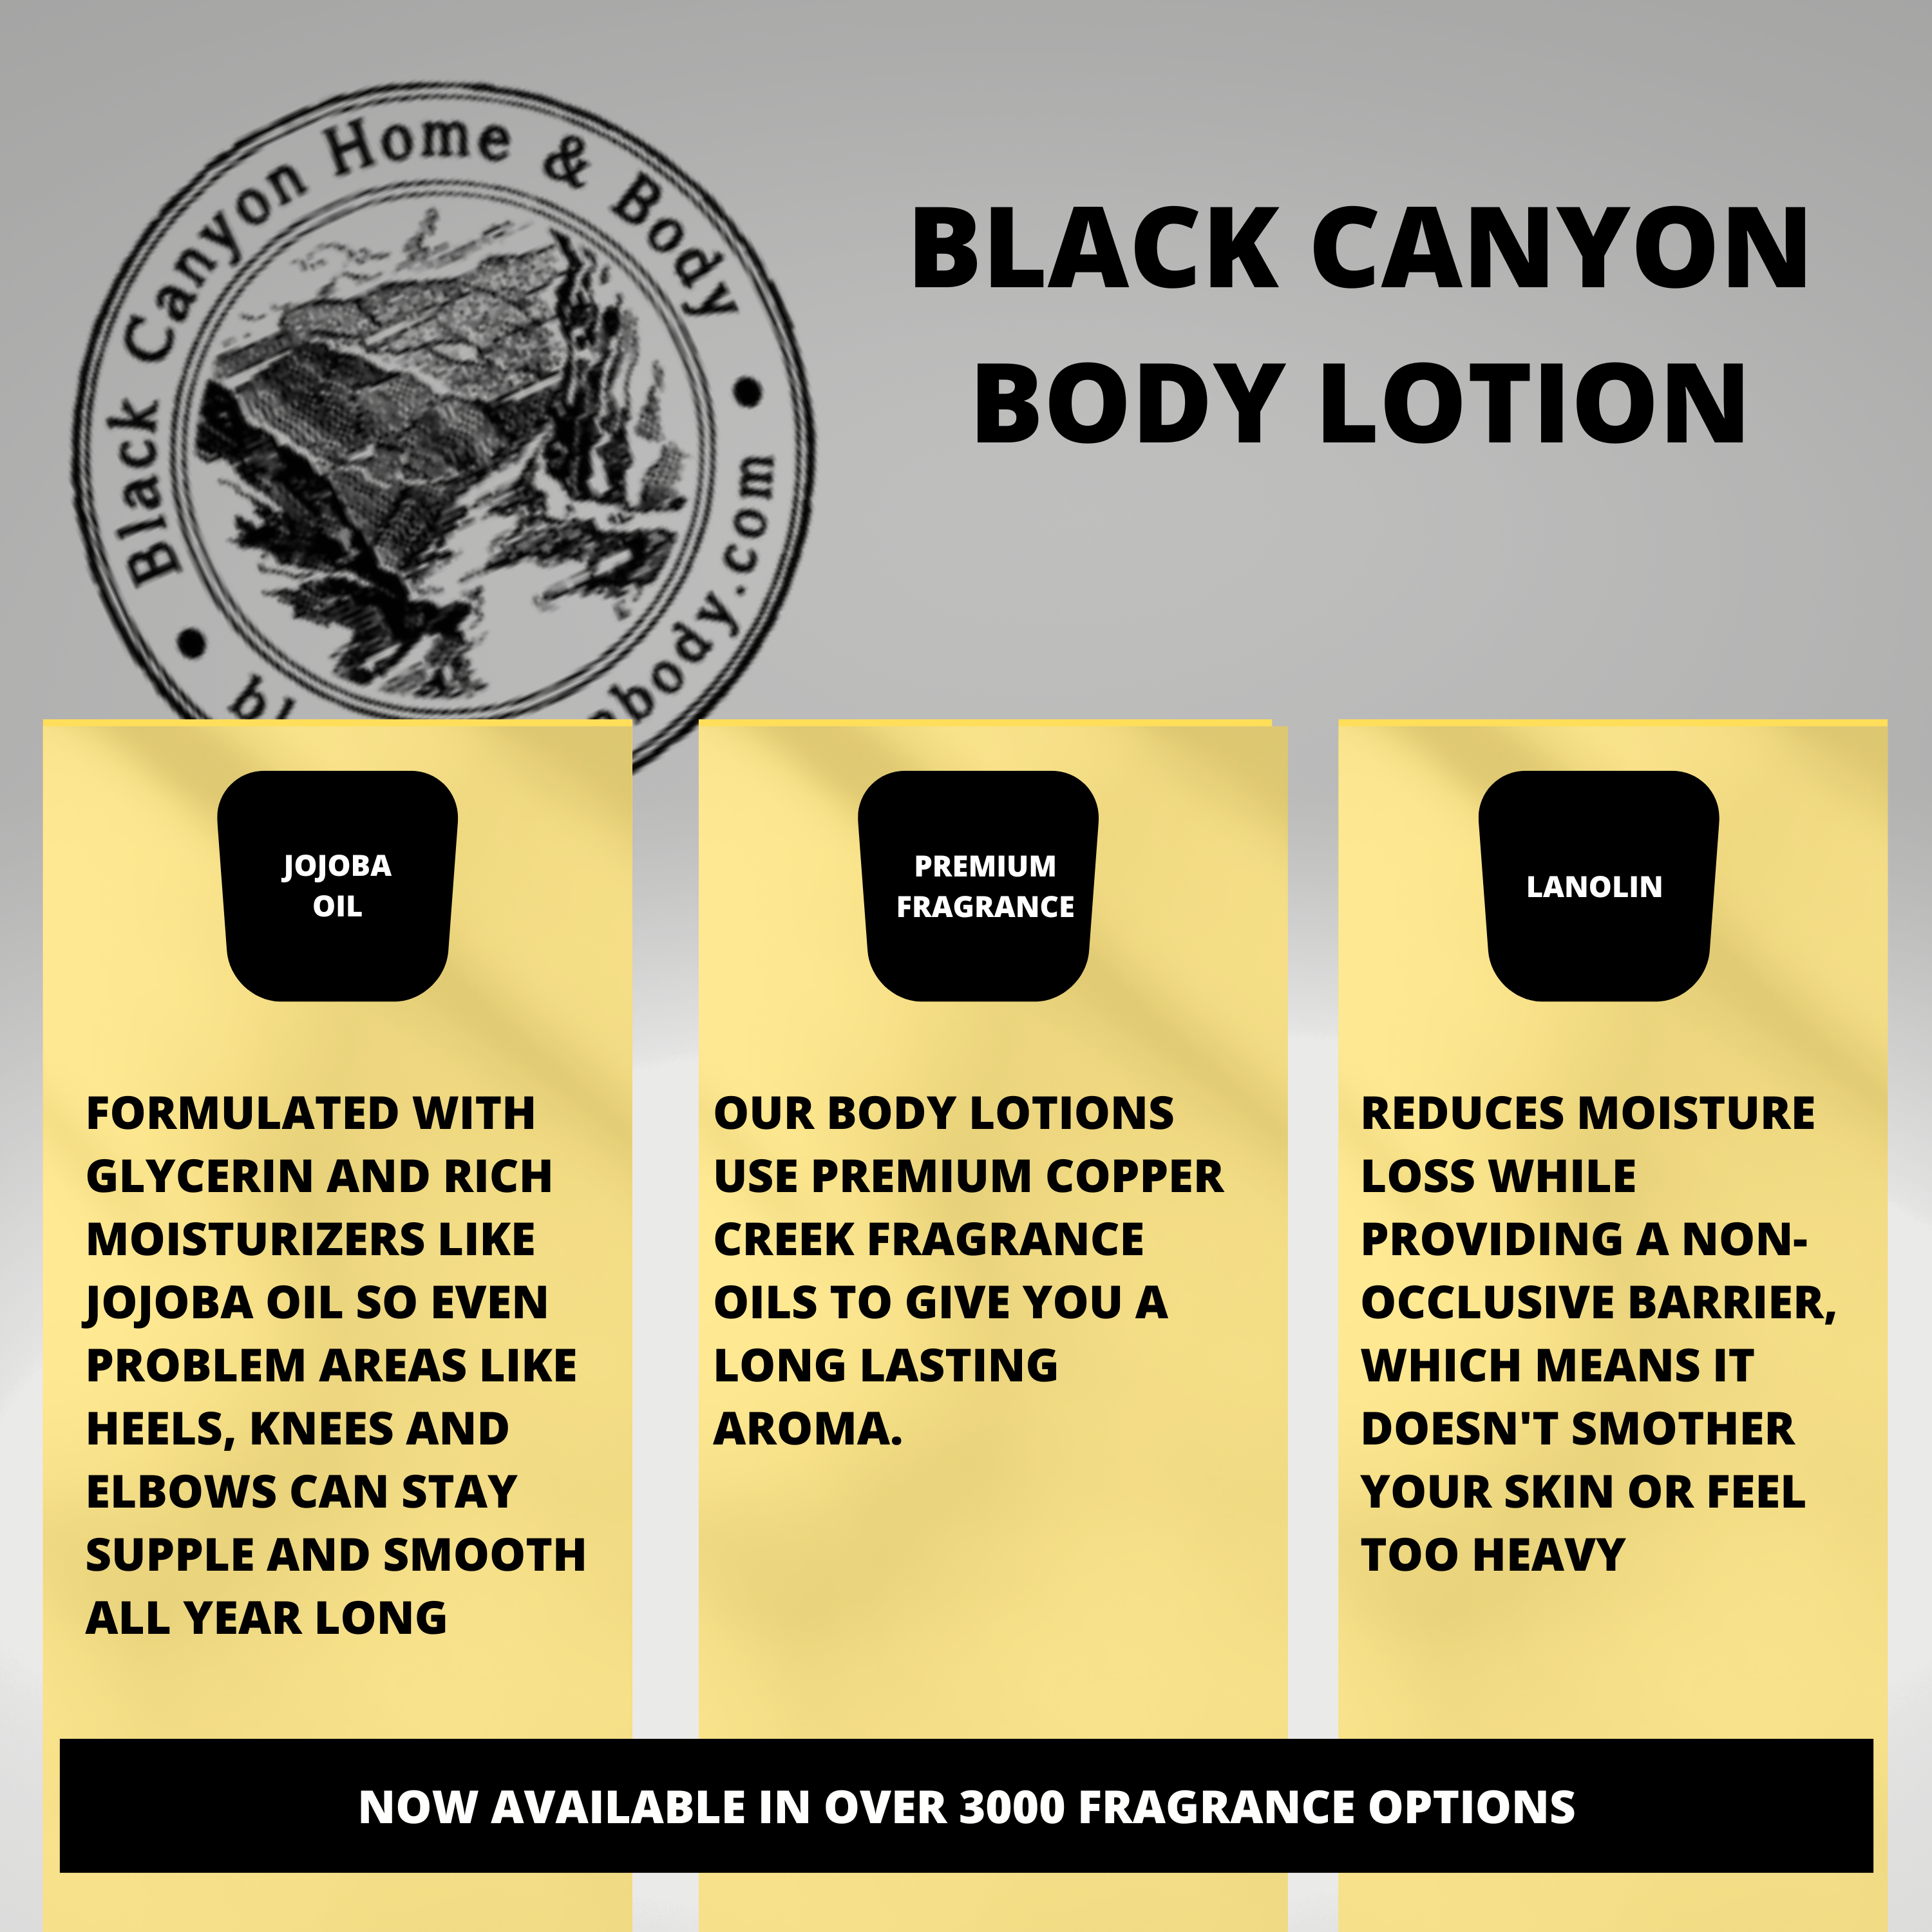 Black Canyon Lavender Leaves Scented Luxury Body Lotion with Lanolin and Jojoba Oil